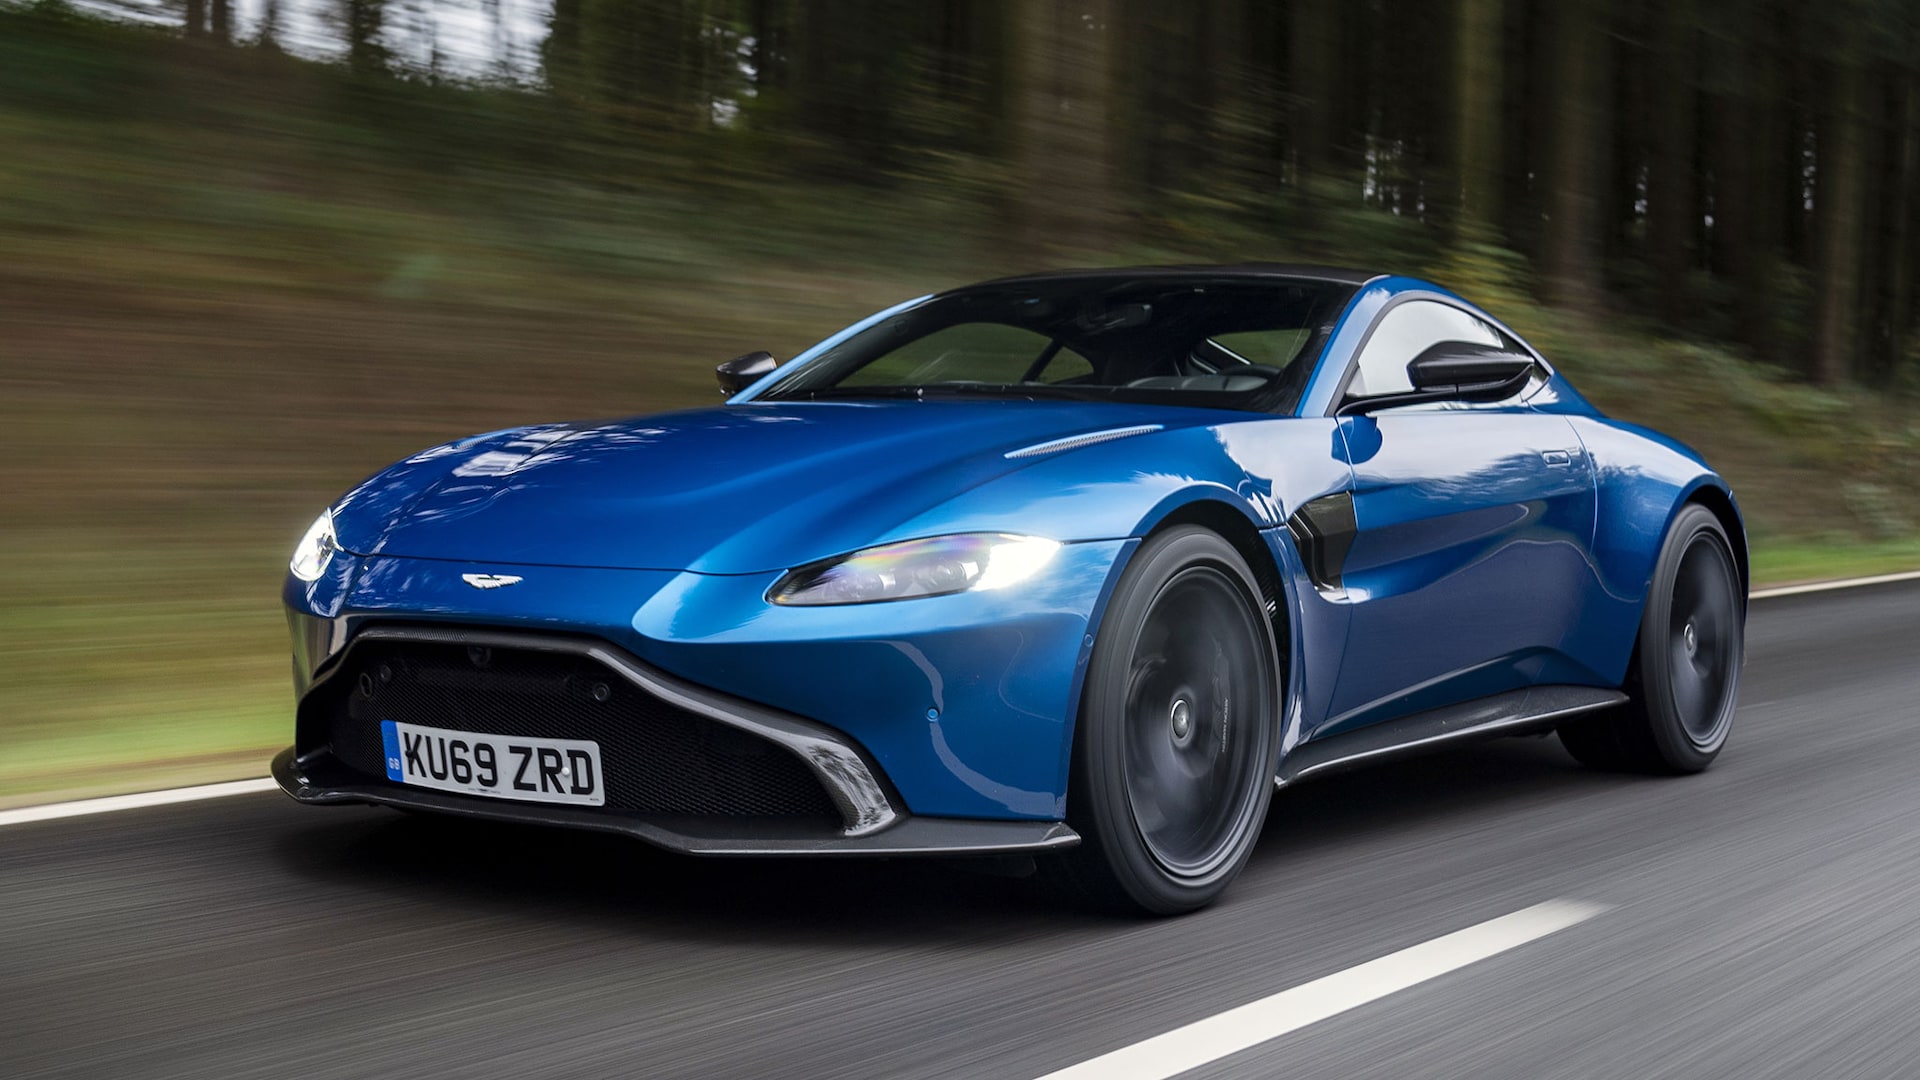 2021 Aston Martin Vantage Now Comes Standard With a Stick!